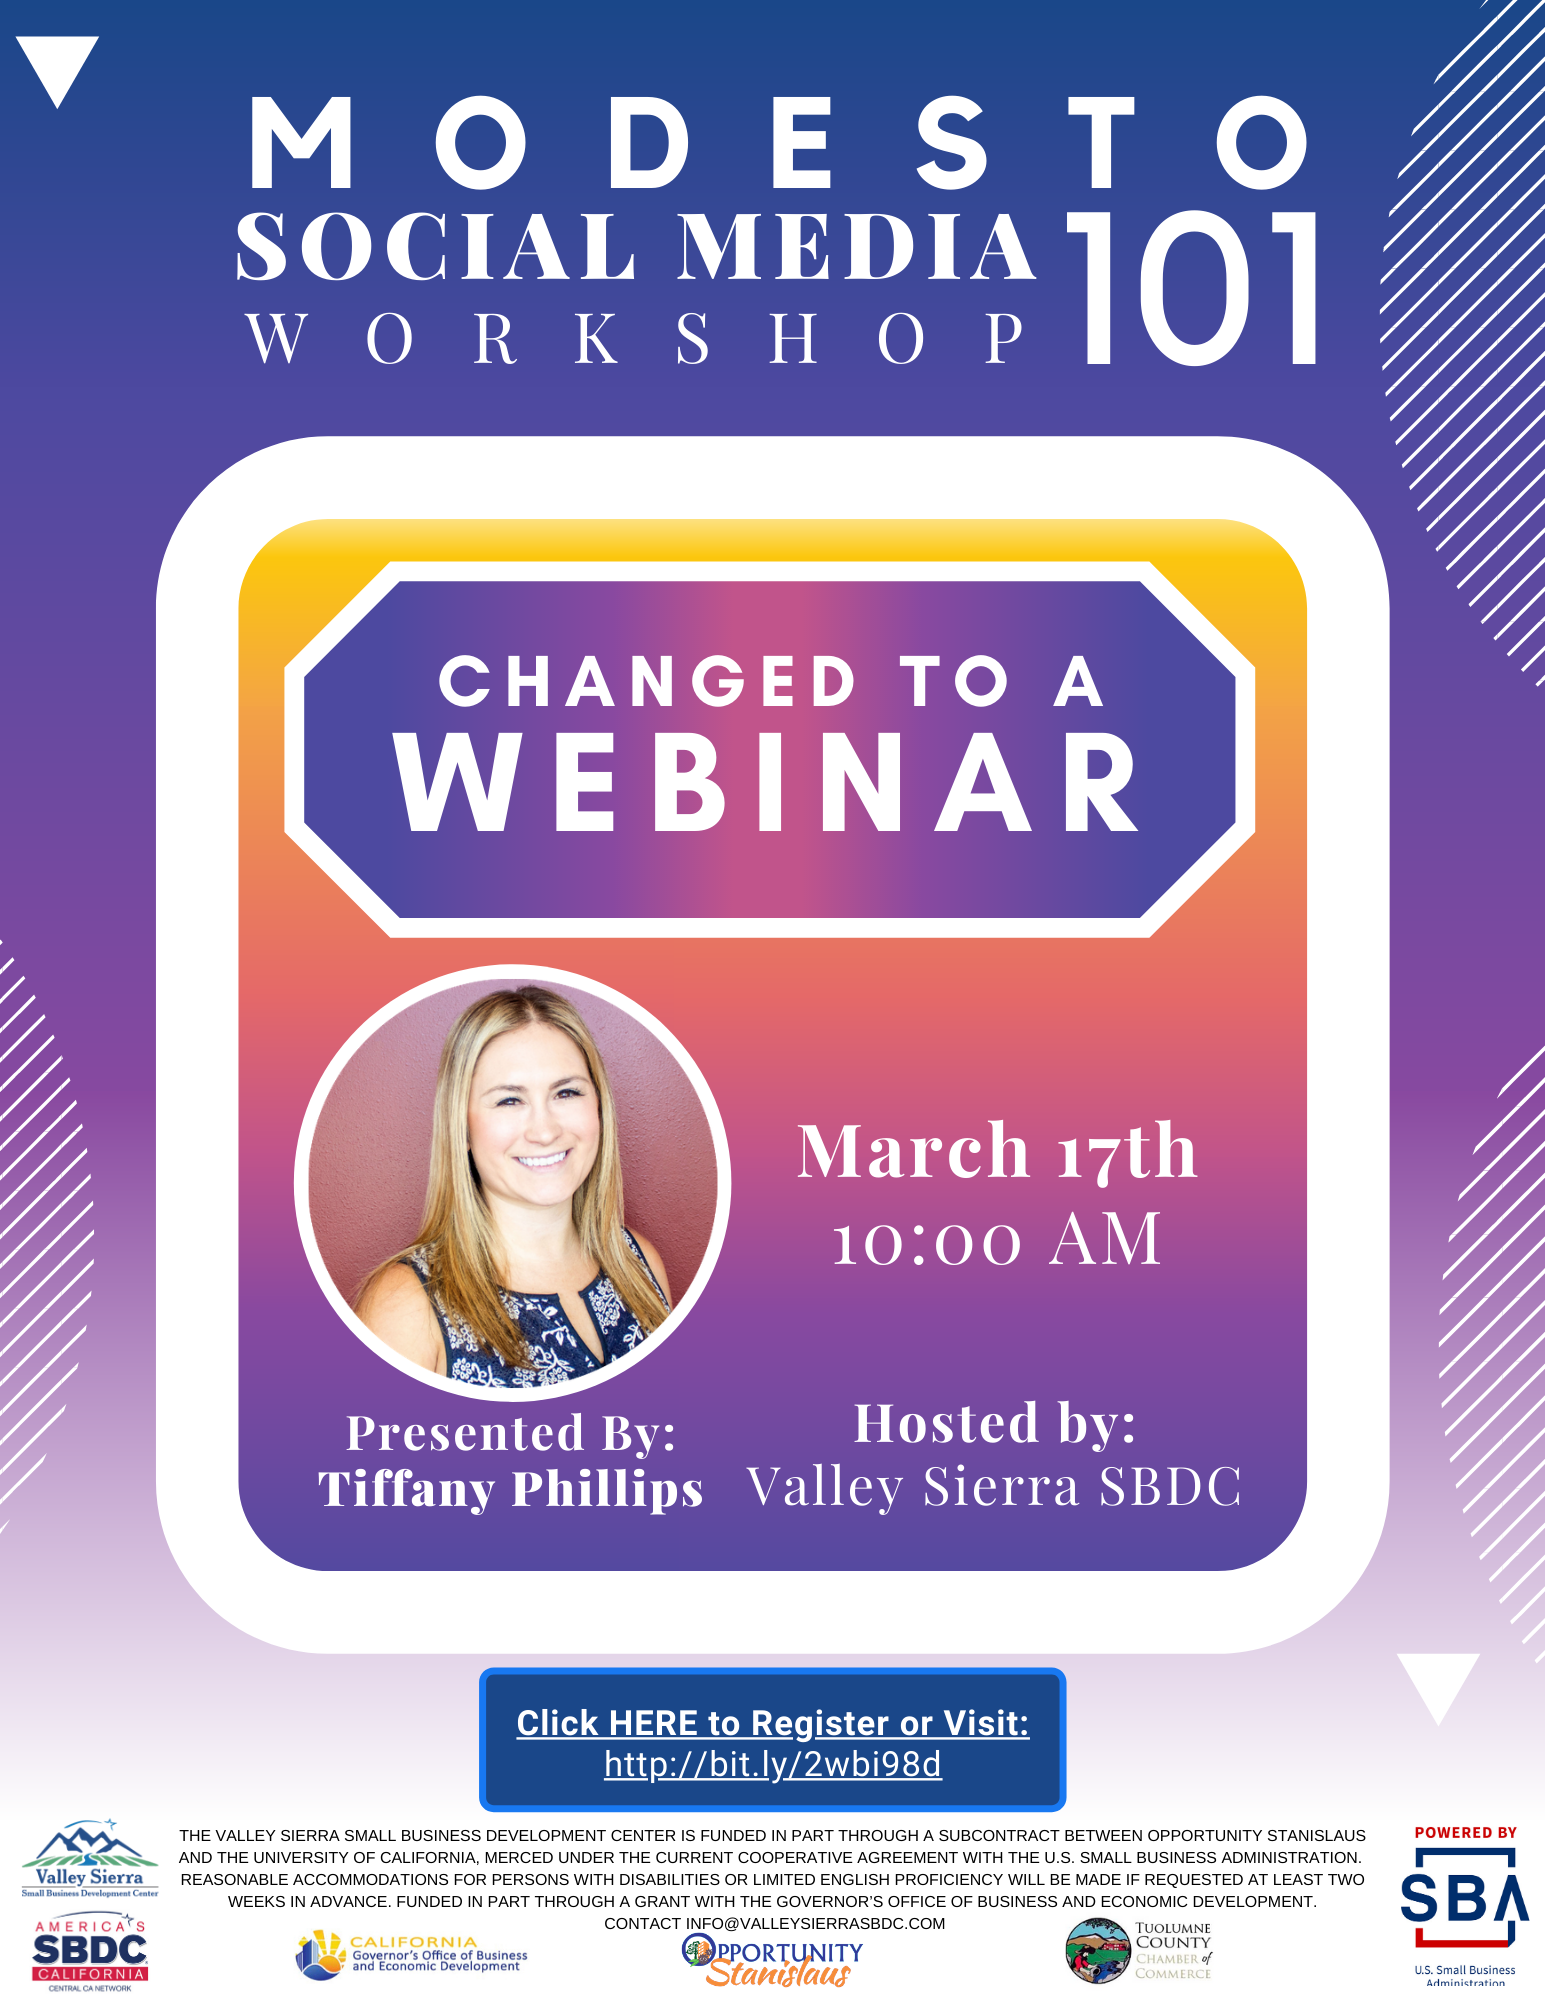 Event Flyer, Changed to Webinar, Modesto: Social Media 101. 3/17/2020 10am - 12pm. FREE. At the Valley Sierra SBDC, 1625 I Street, Modesto, CA.